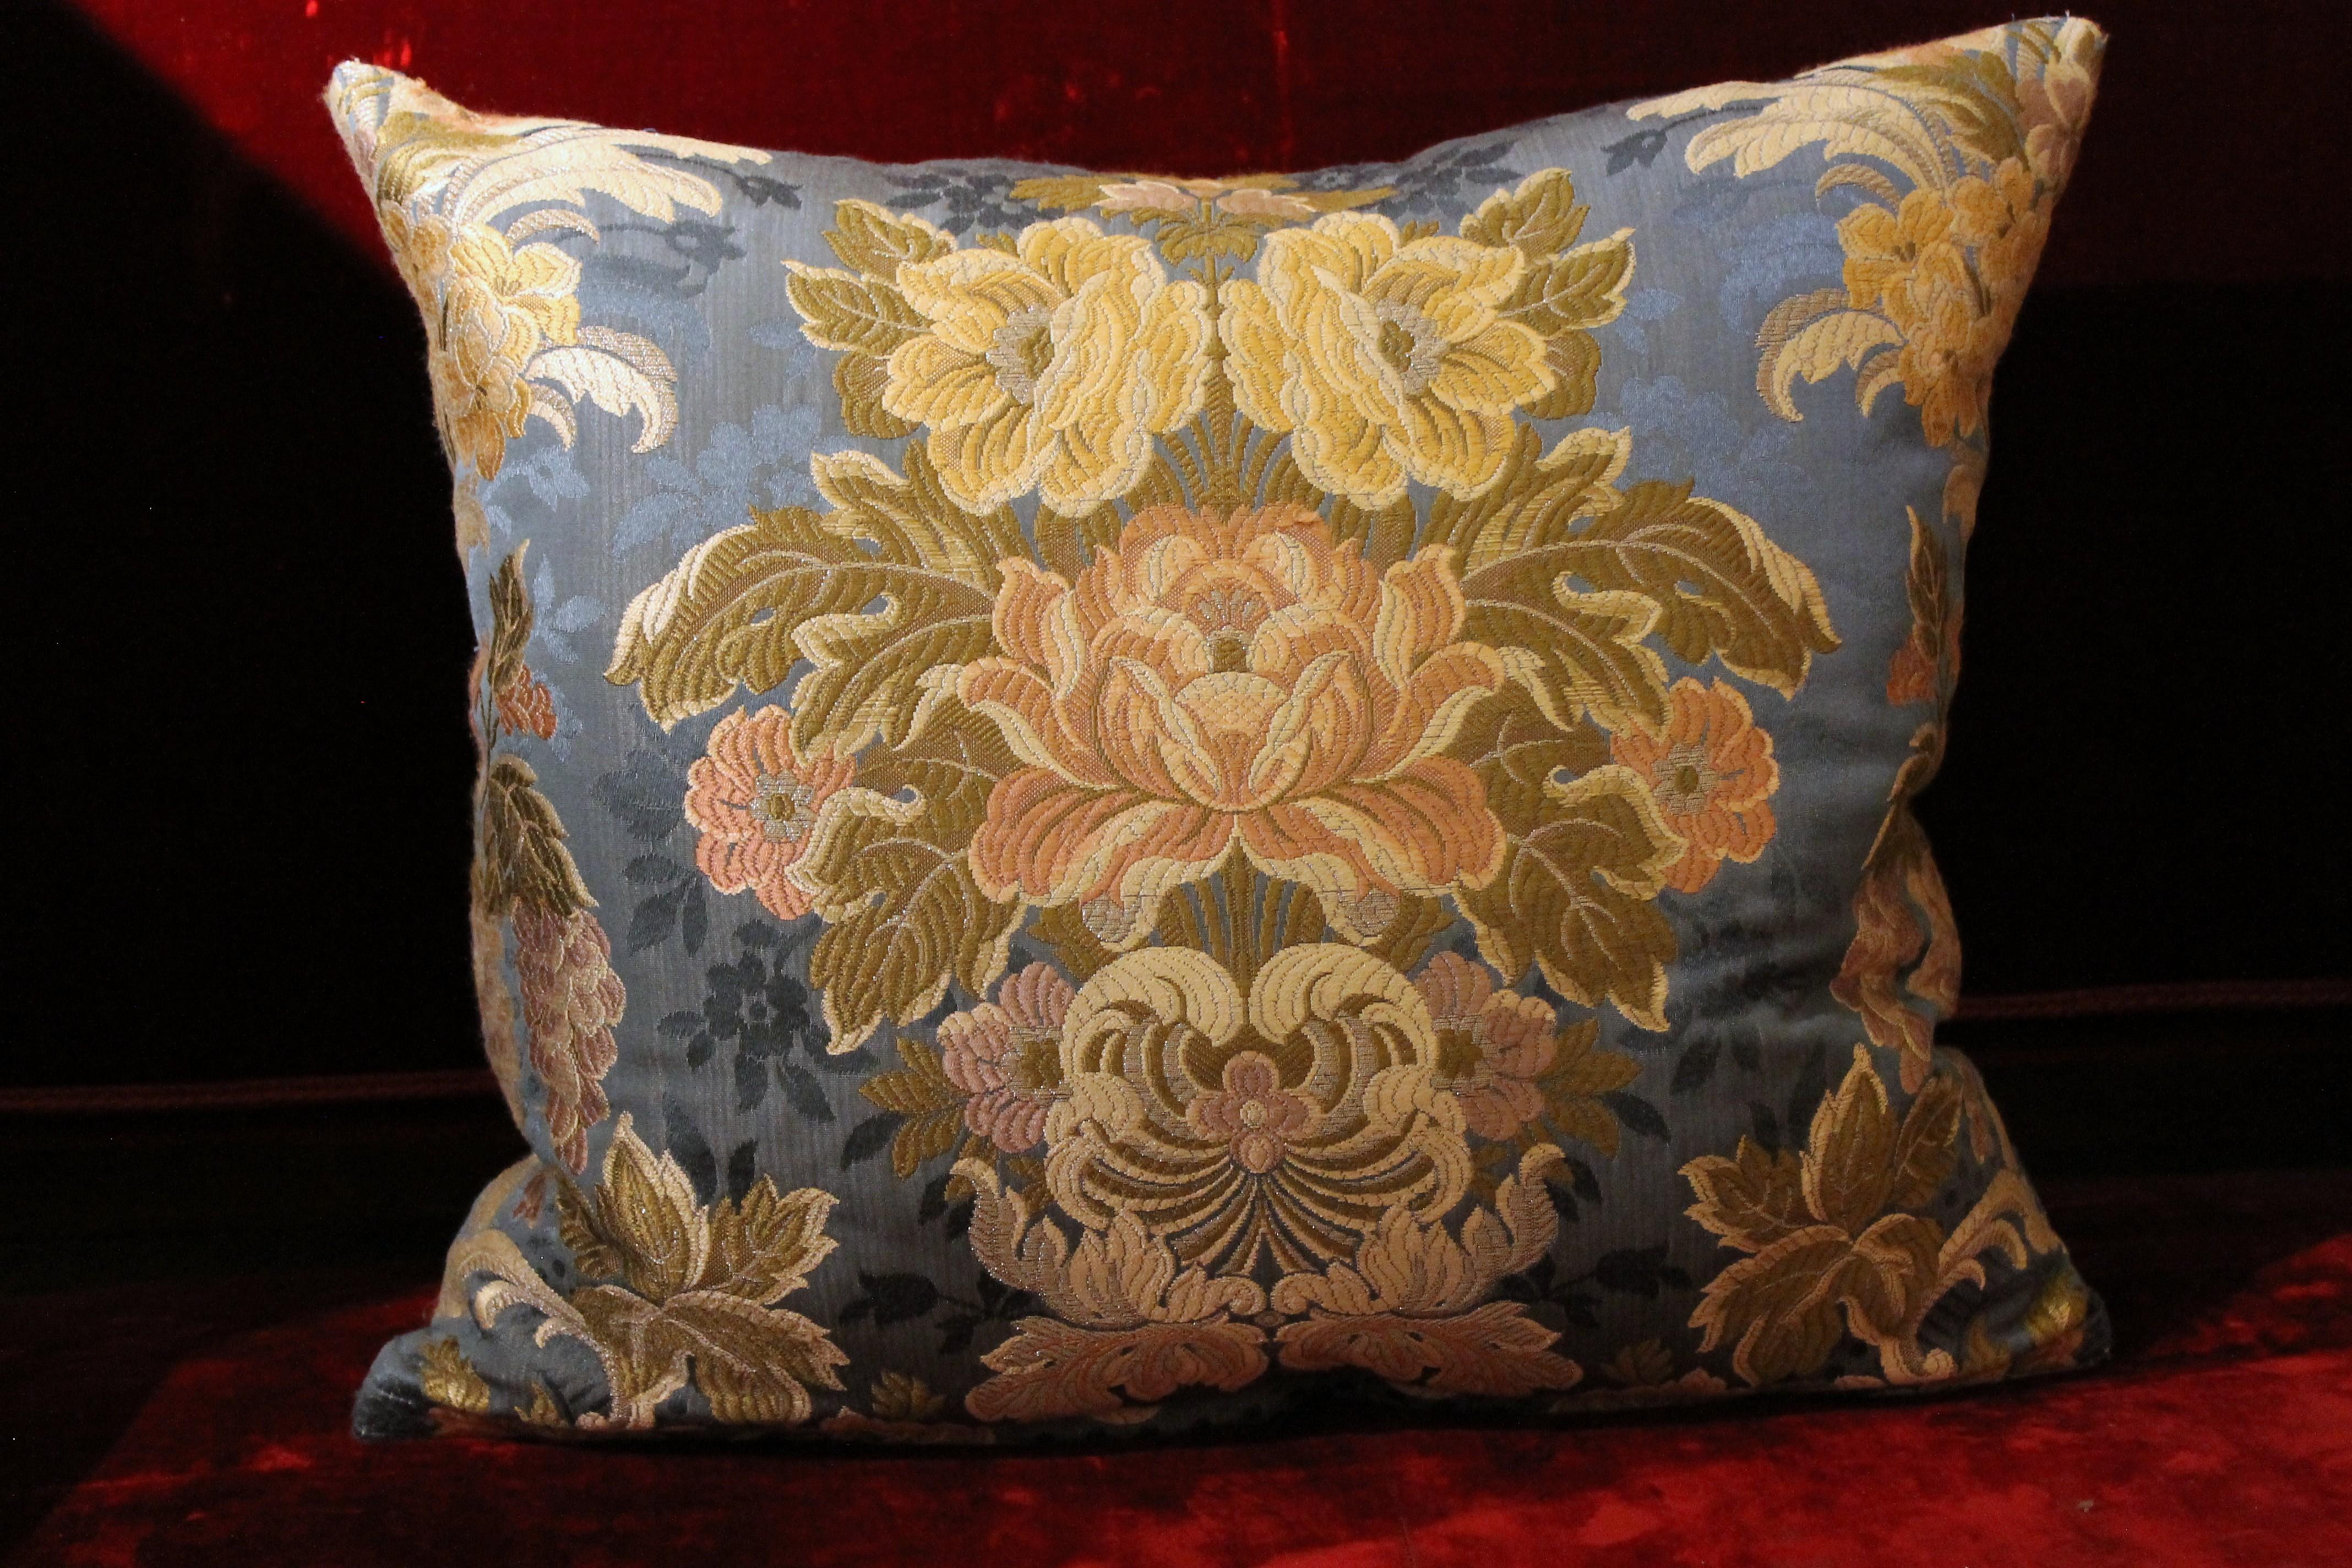 These beautiful decorative throw pillows are designed and hand crafted in Italy, upholstered on both sides with a particular kind of luxury brocade called Lampas made of 100% cotton fabric.
This high end fabric features gorgeous floral design and